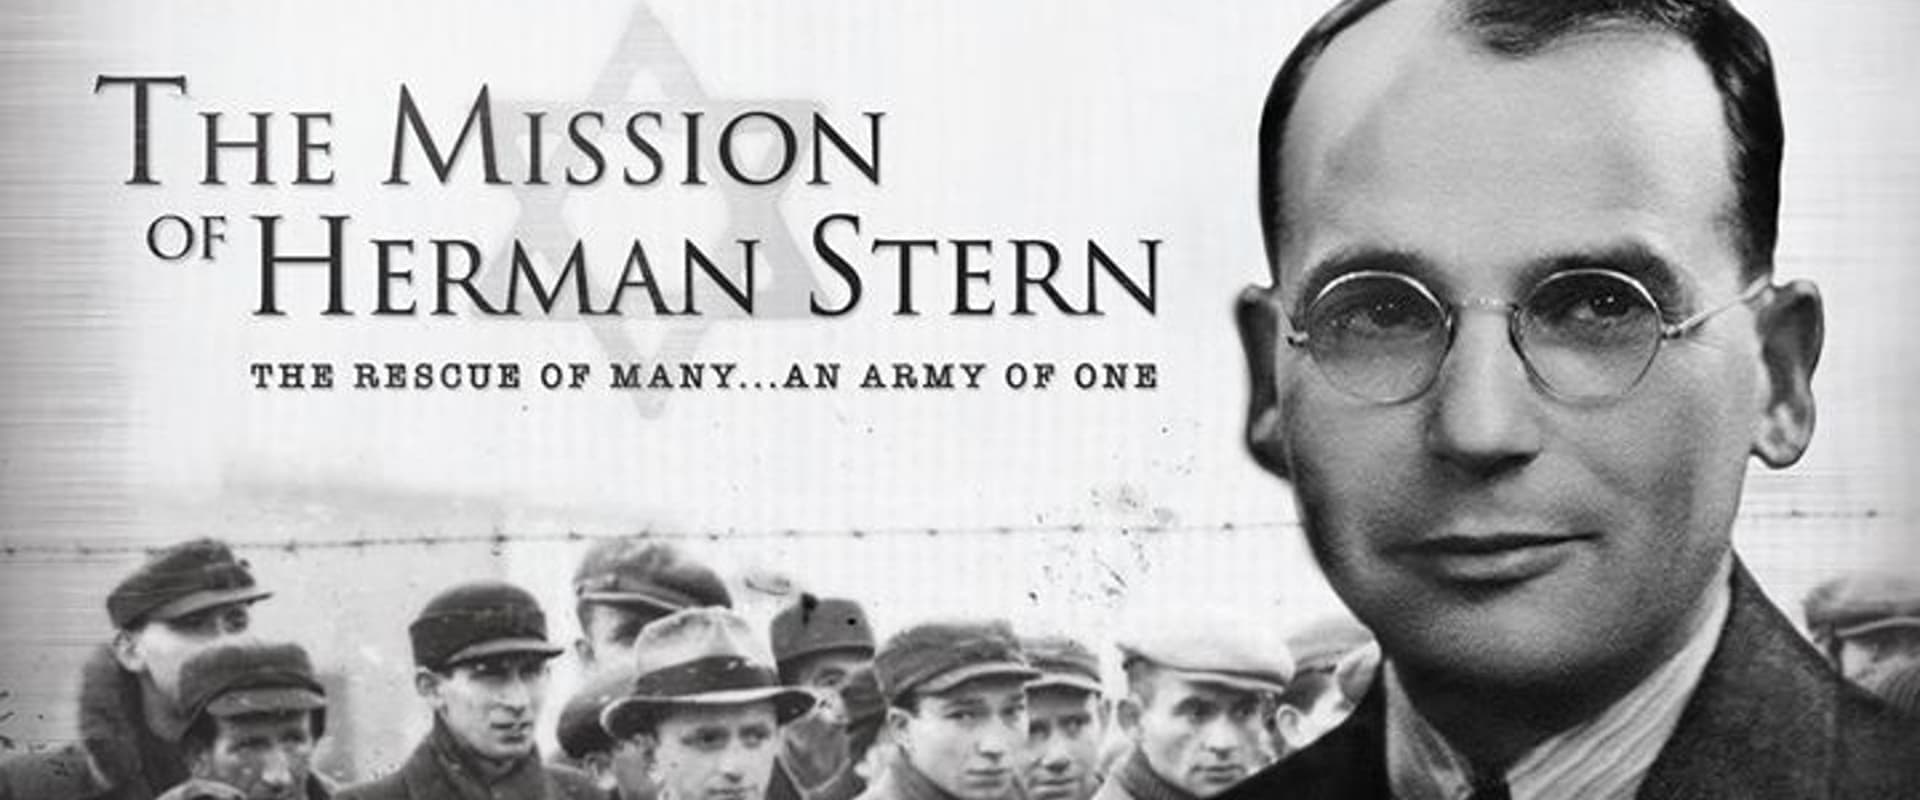 The Mission of Herman Stern